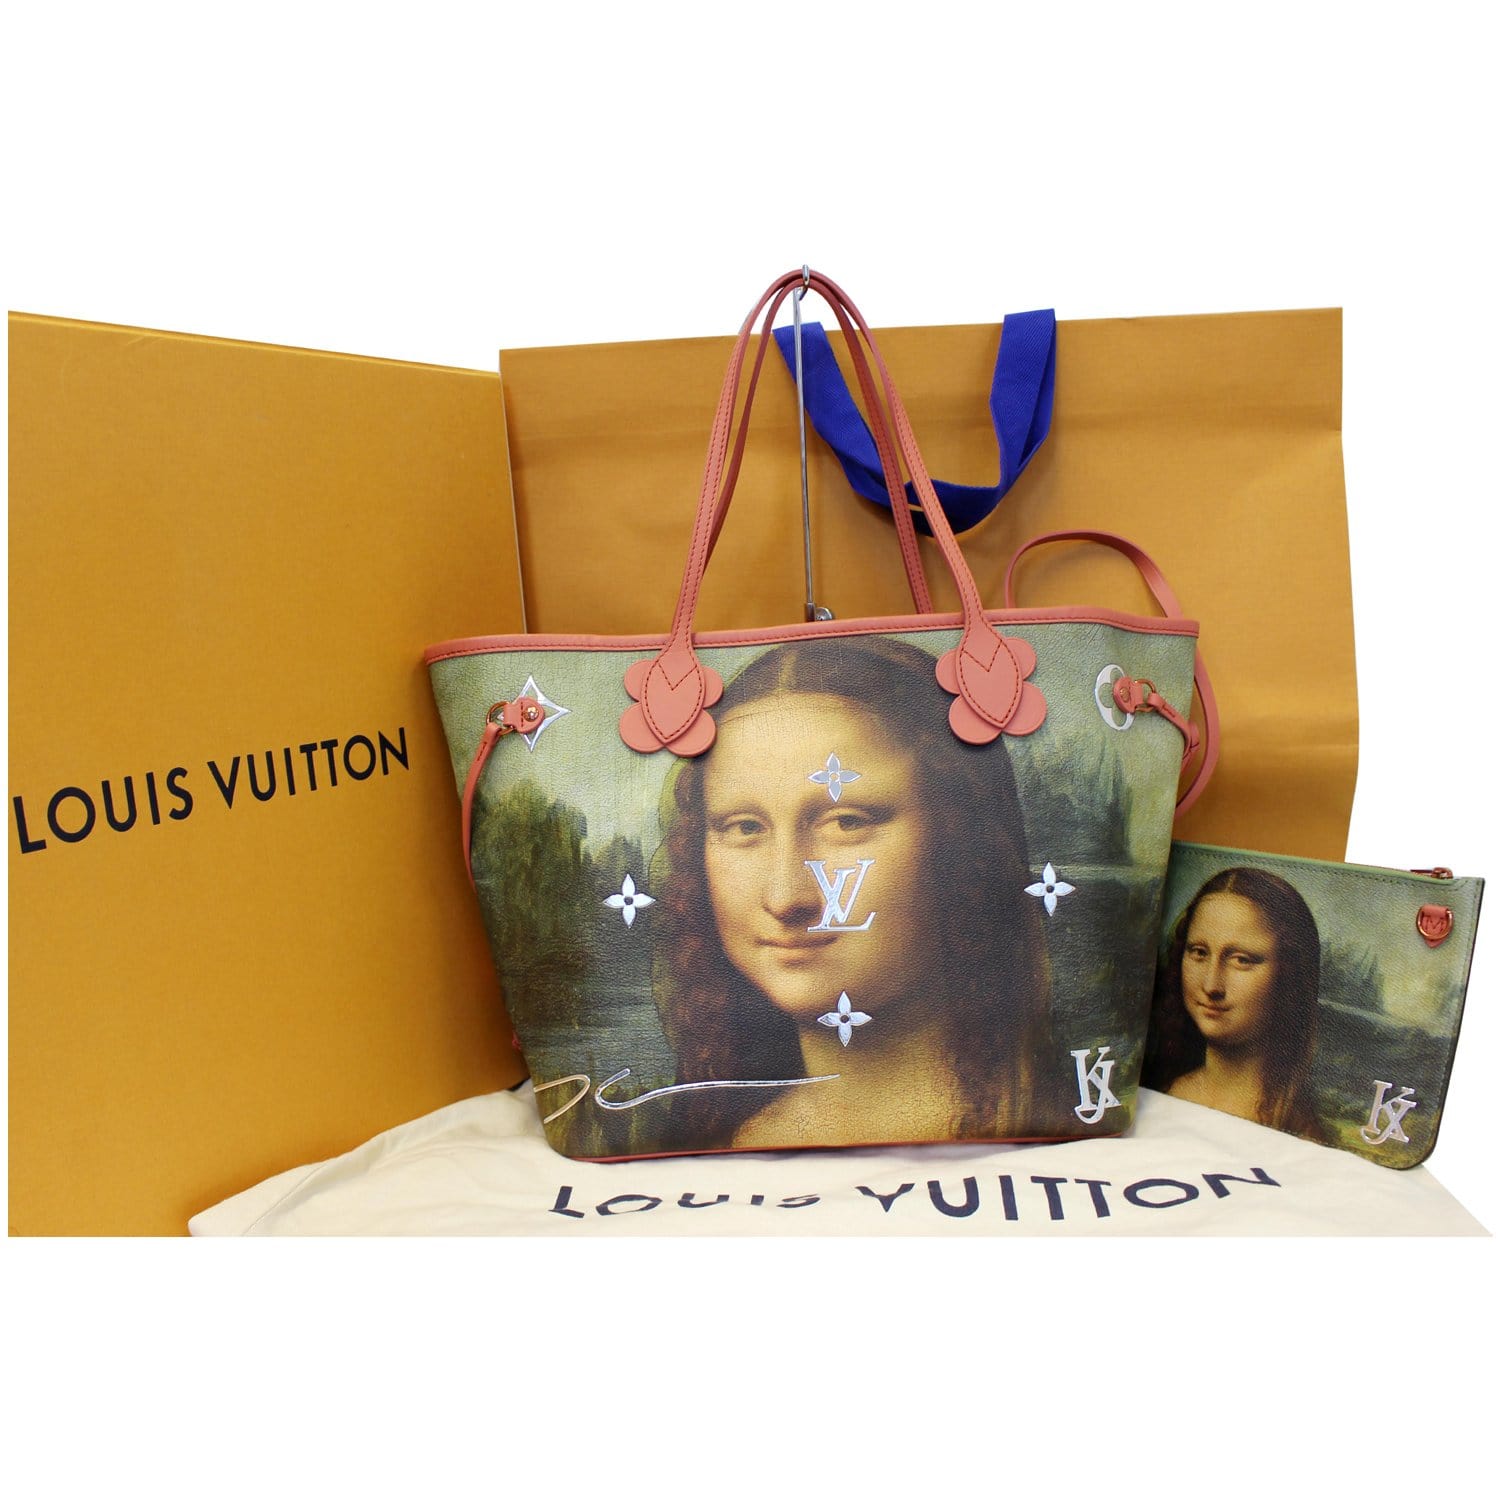 Jeff Koons, Louis Vuitton Da Vinci bag (signed and dated by Jeff Koons) ( 2017), Available for Sale